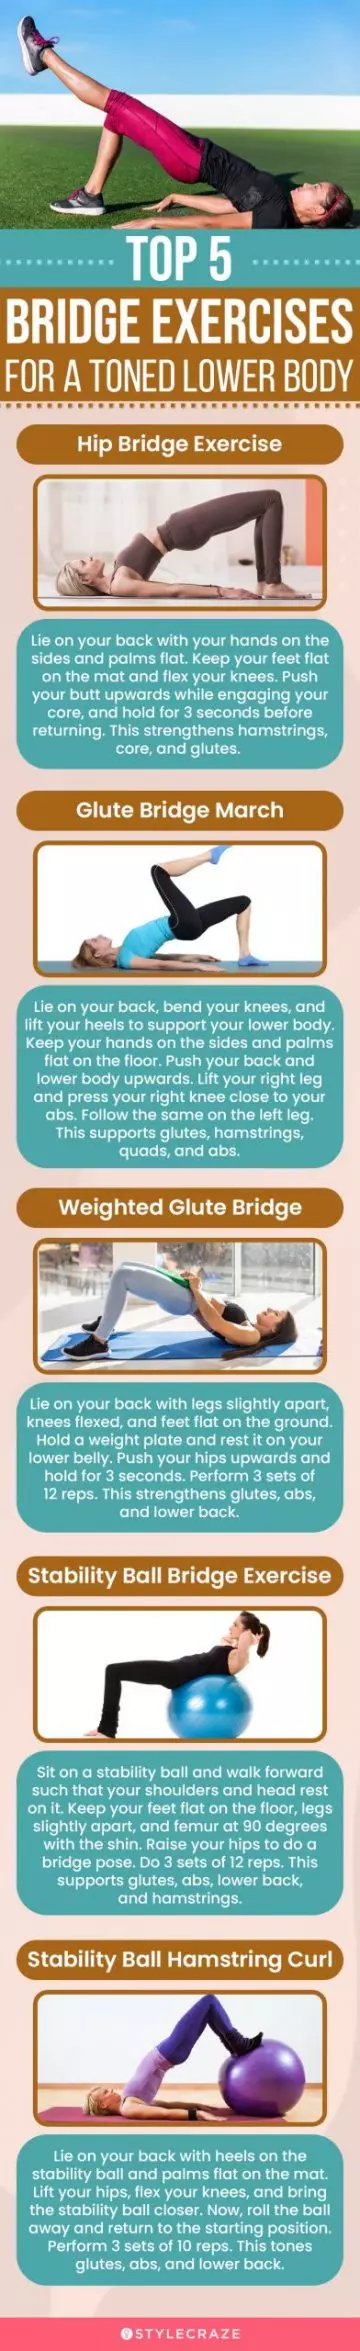 top 5 bridge exercises for a toned lower body(infographic)